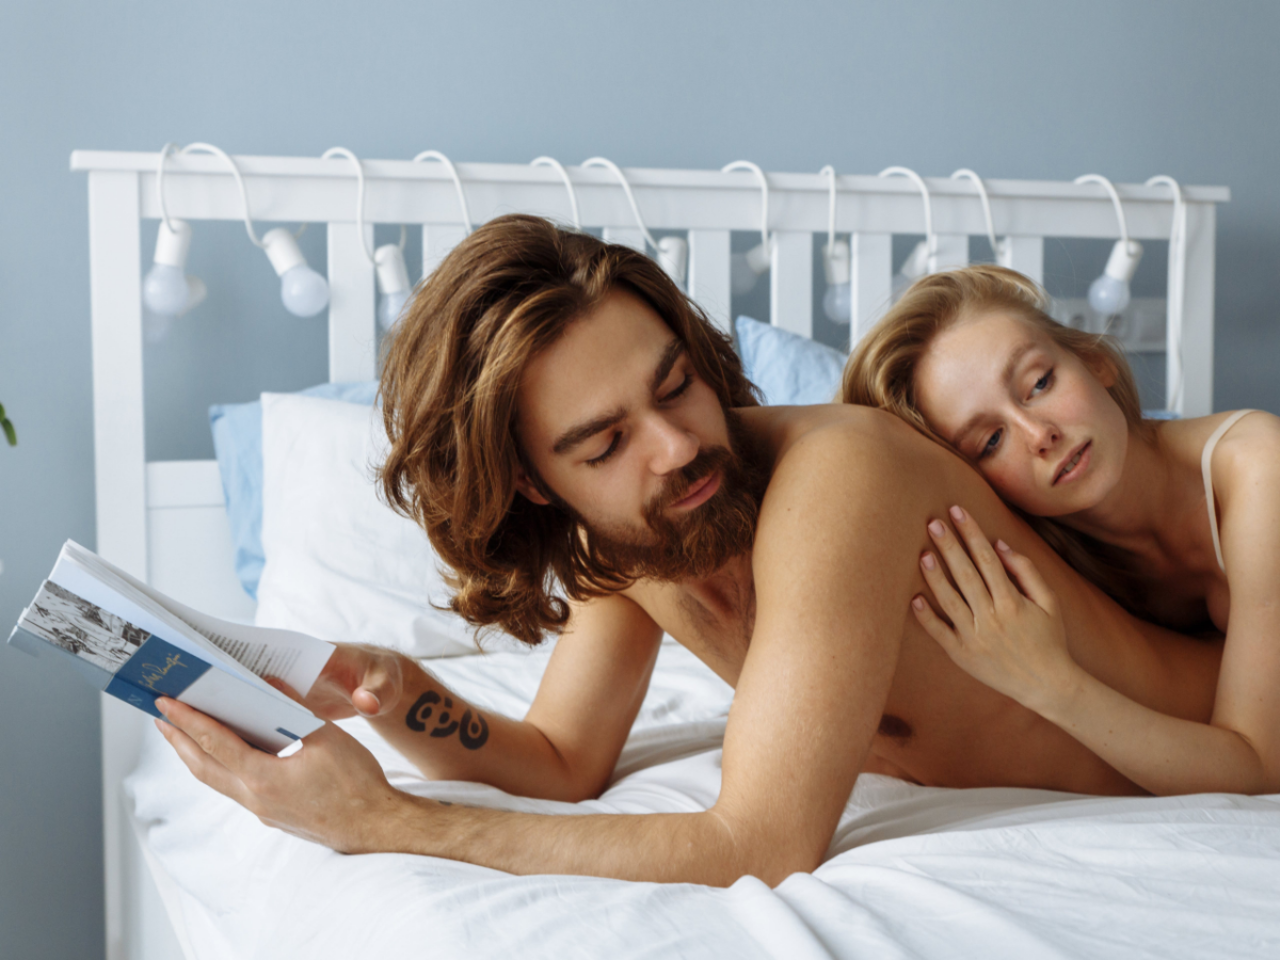 These are the pros and cons of sexual fantasies in relationships pic image